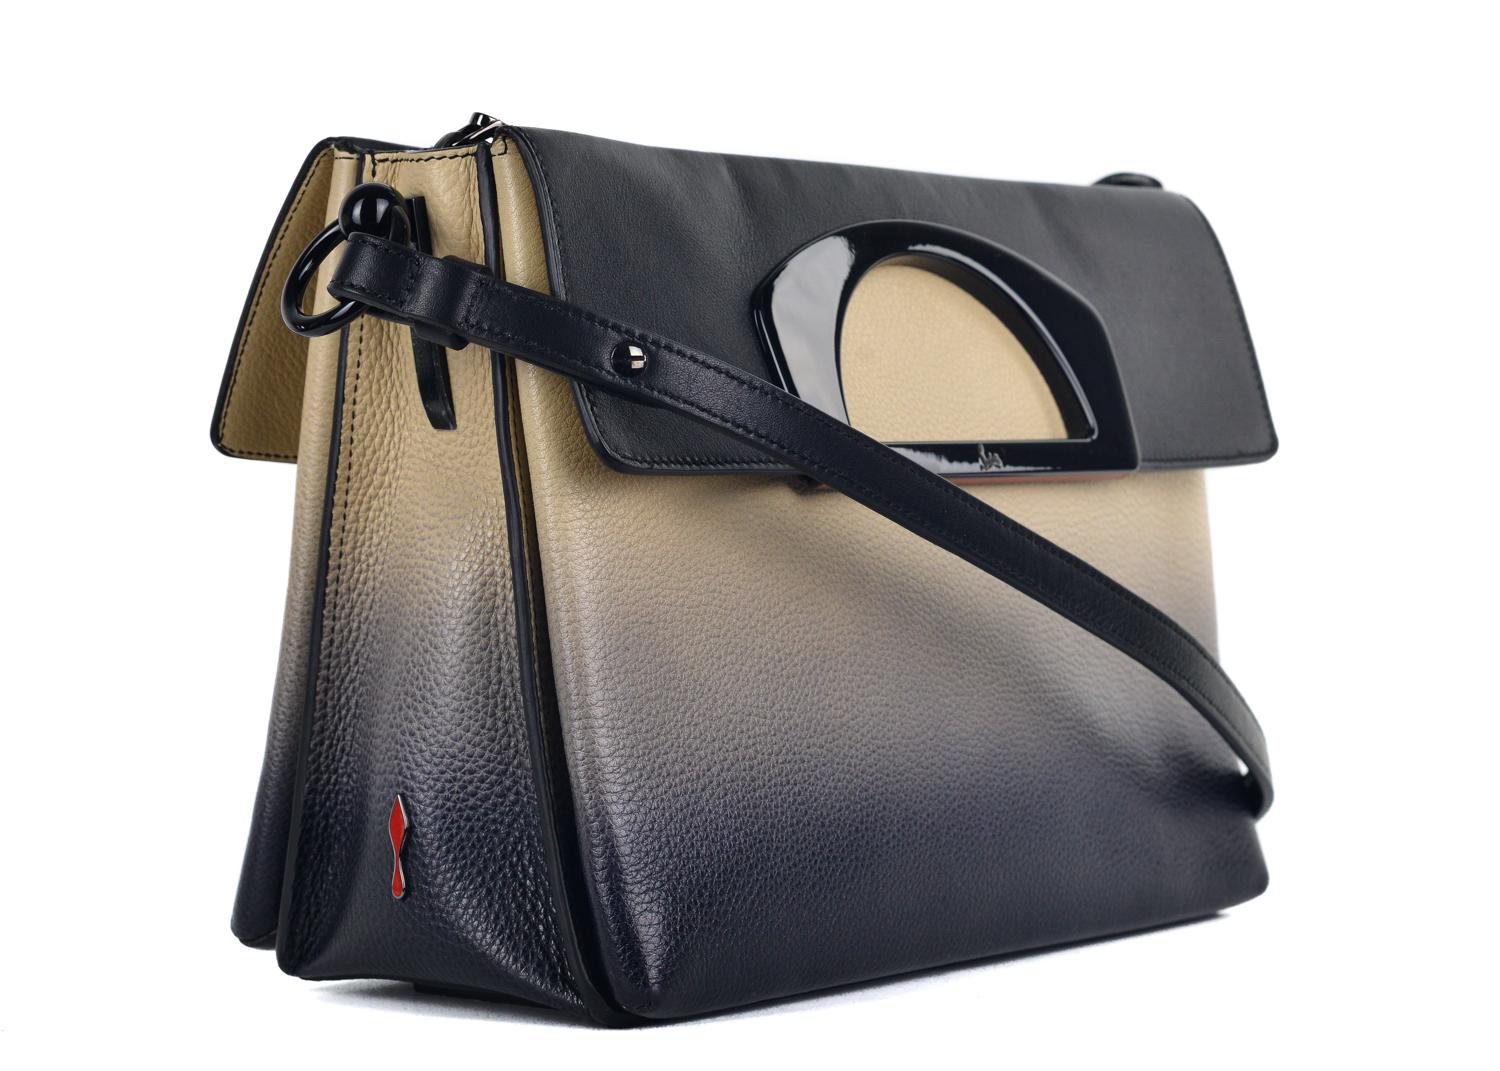 Black and creme ombré grained leather Christian Louboutin Passage bag with coated black hardware, dual resin flat top handles, optional flat shoulder strap, tonal stitching throughout, three interior compartments; one with zip closure, red